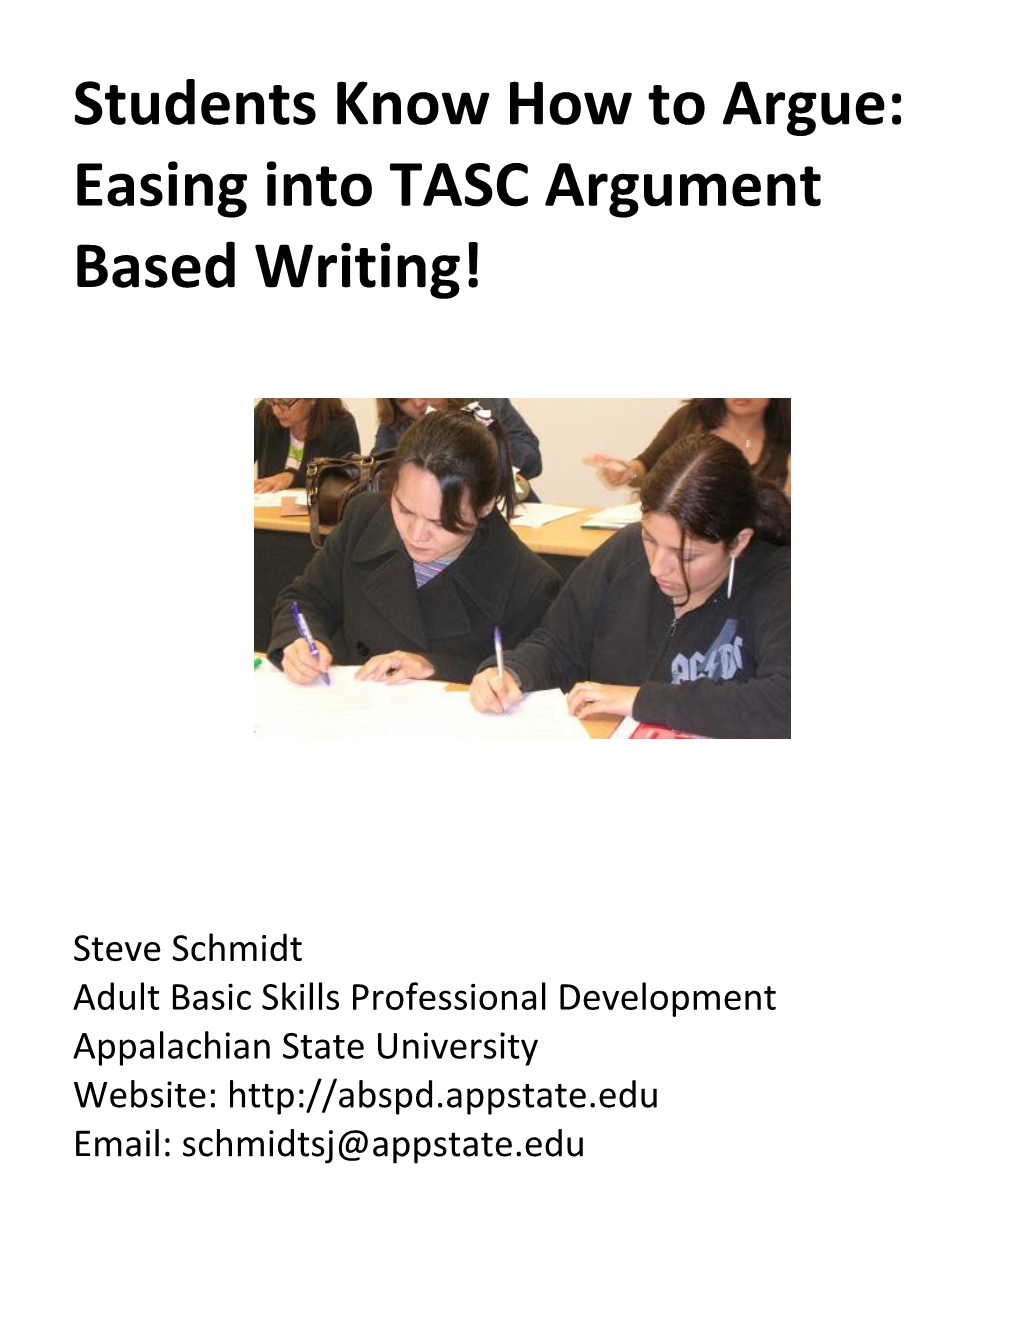 Students Know How to Argue: Easing Into TASC Argument Based Writing!